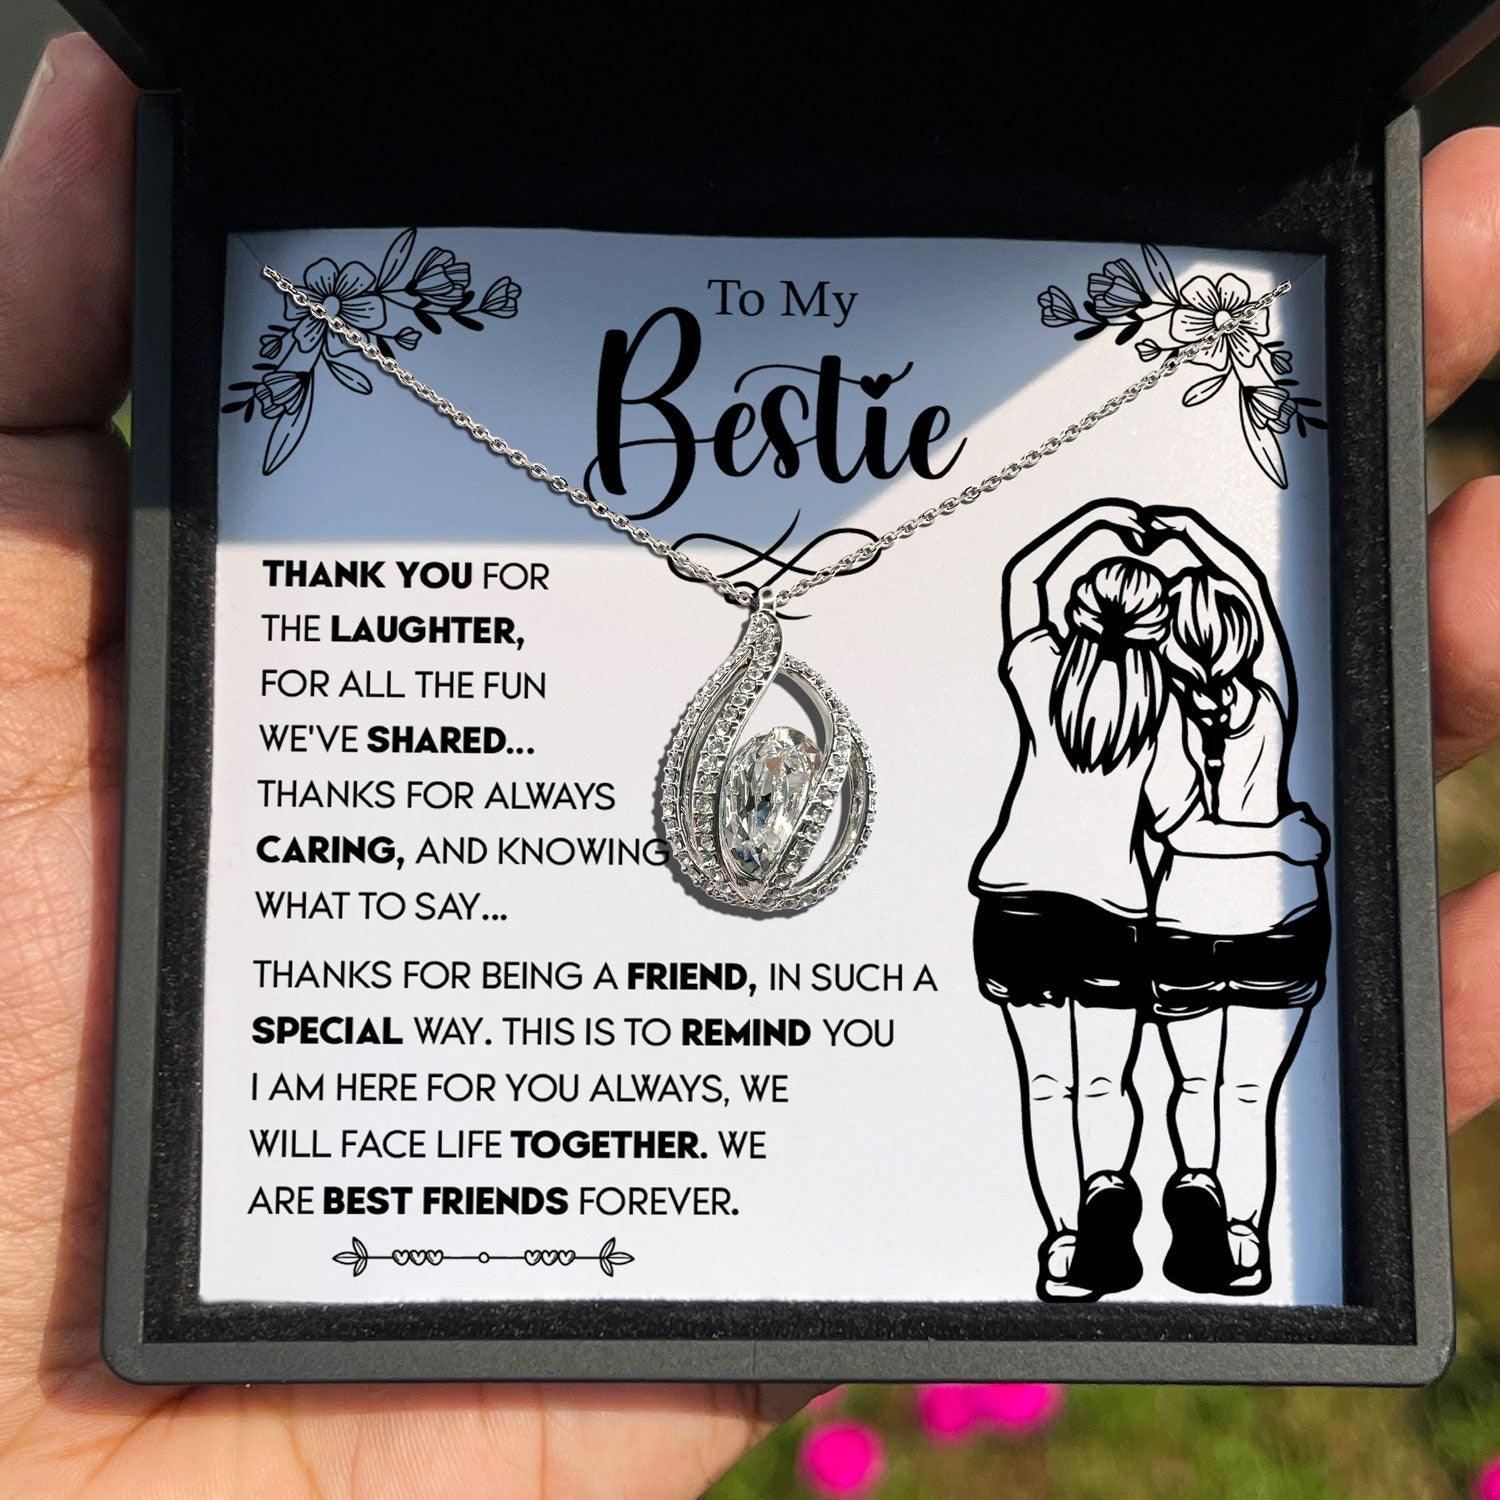 To My Bestie - Thanks For Always Caring, And Knowing What To Say - Orbital Birdcage Necklace - TRYNDI